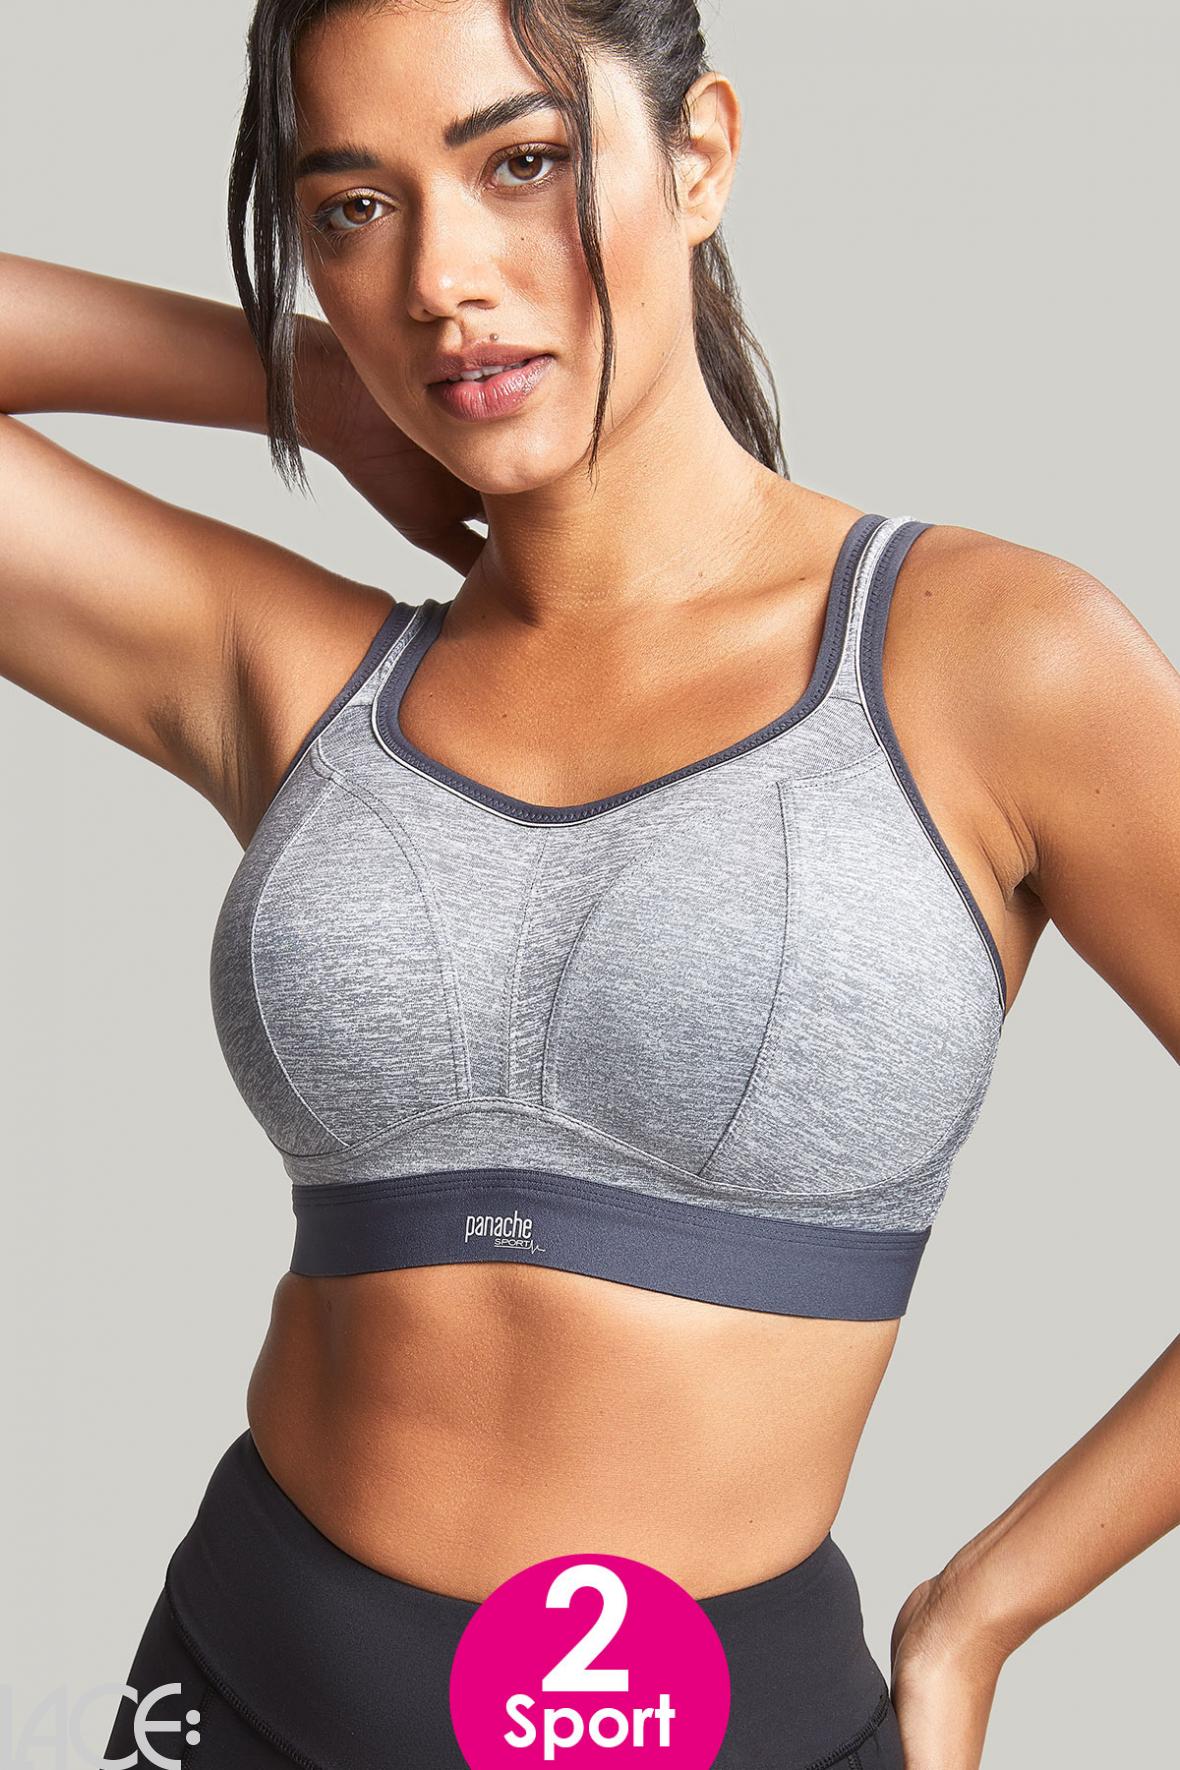 Panache Sport Sports bra non-wired F-K cup CHARCOAL MARL – Lace